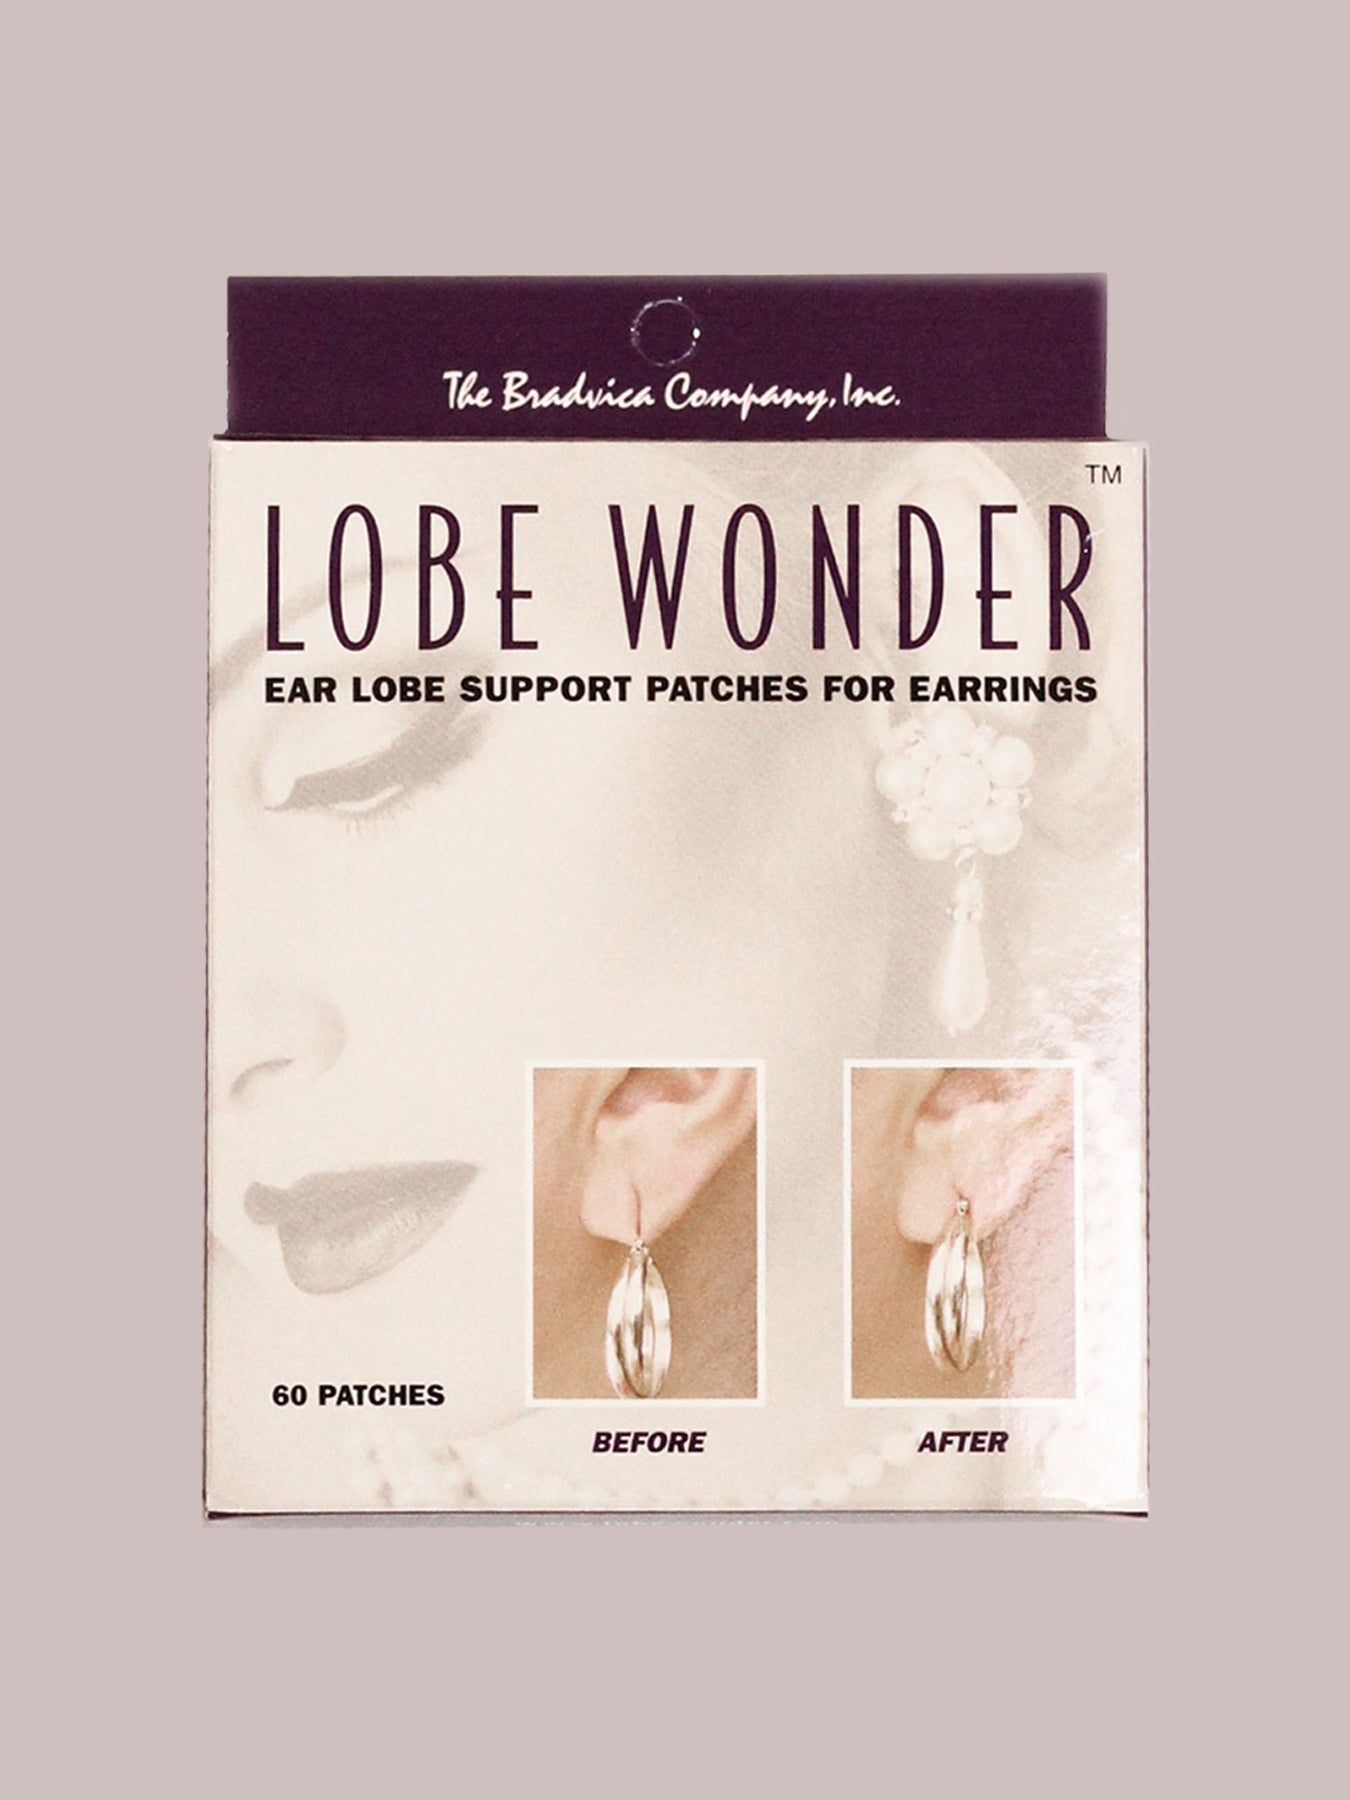 Lobe Wonder Ear Lobe Support Patches for Earrings Appx 120 Patches